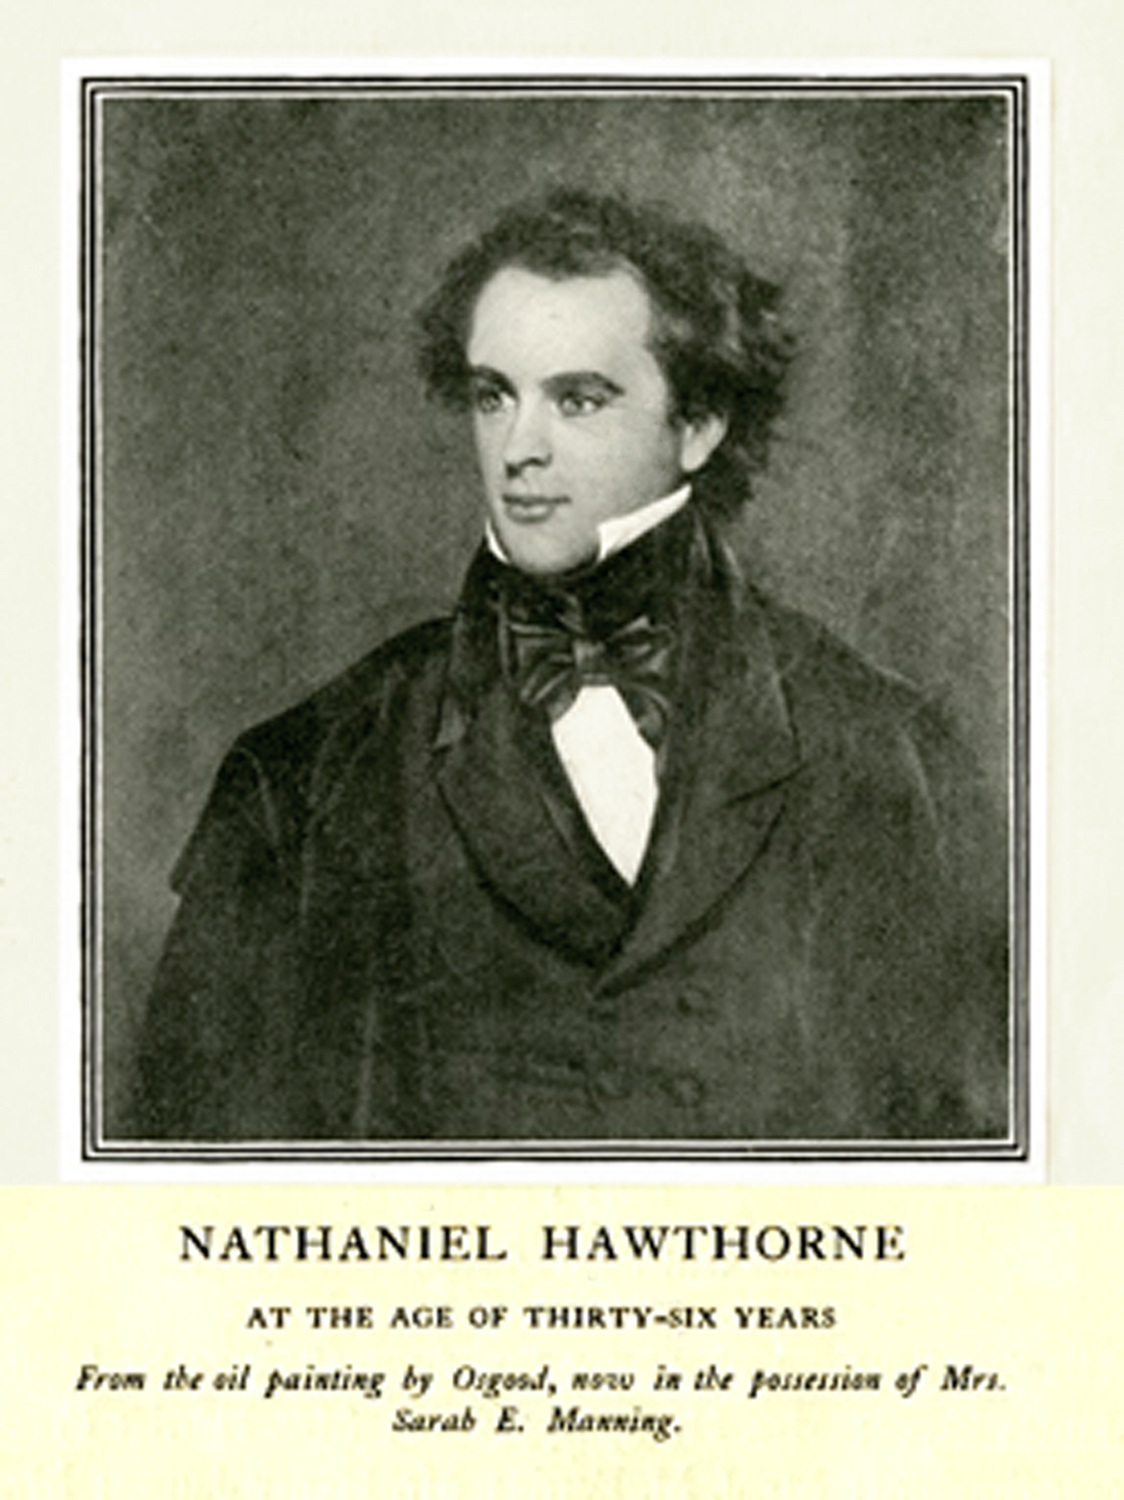 Nathaniel Hawthorne (1804-1864)1904 engraving from an oil portrait by Osgood shows Hawthorne at age 36, during the period he was employed as a customs measurer of coal and salt in the Boston Custom House from 1839 to 1841.